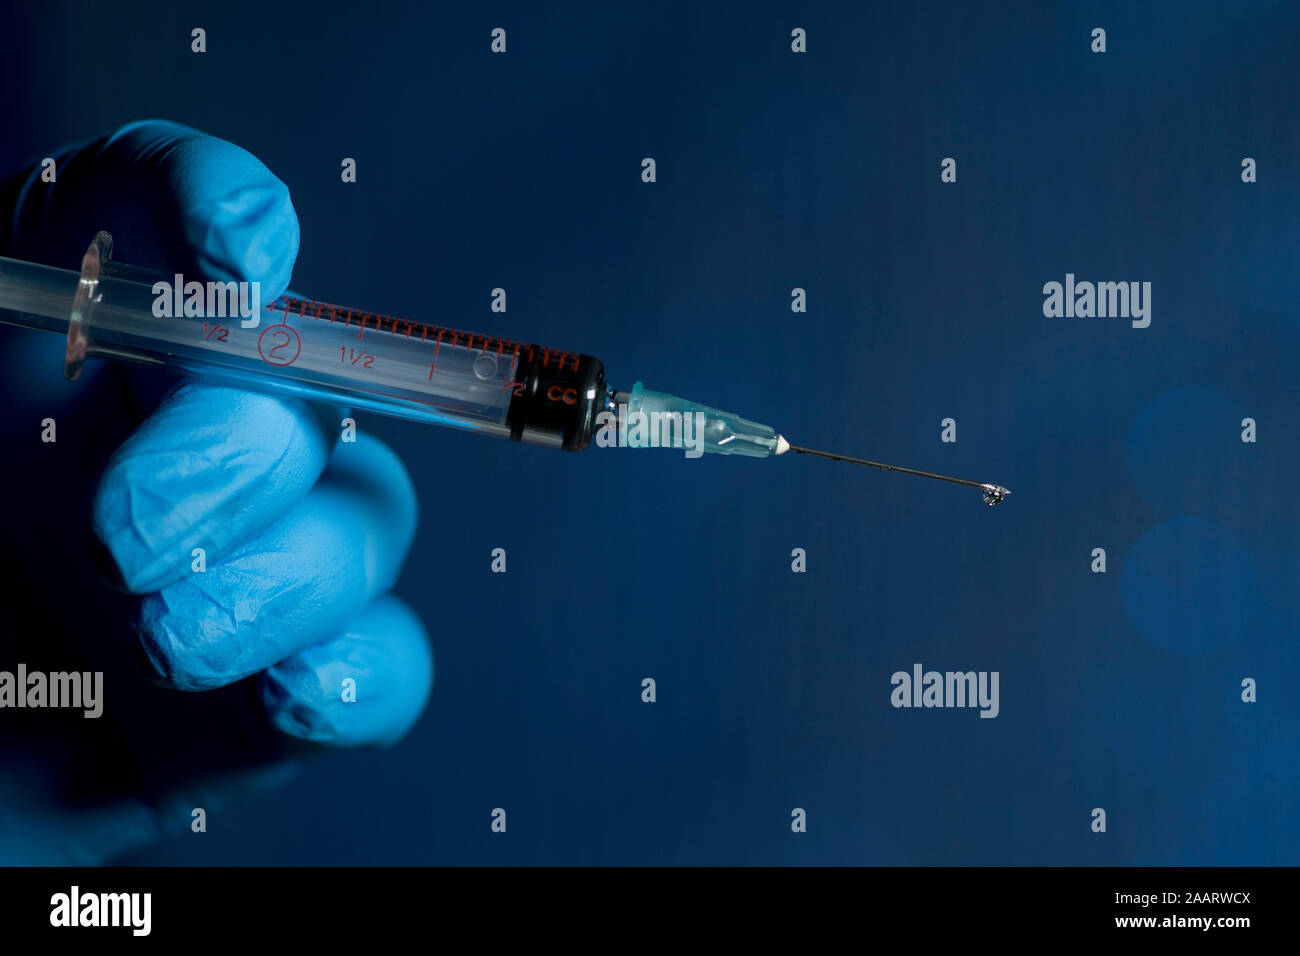 Hypodermic needle with droplet held by gloved hand on dark blue. Stock Photo